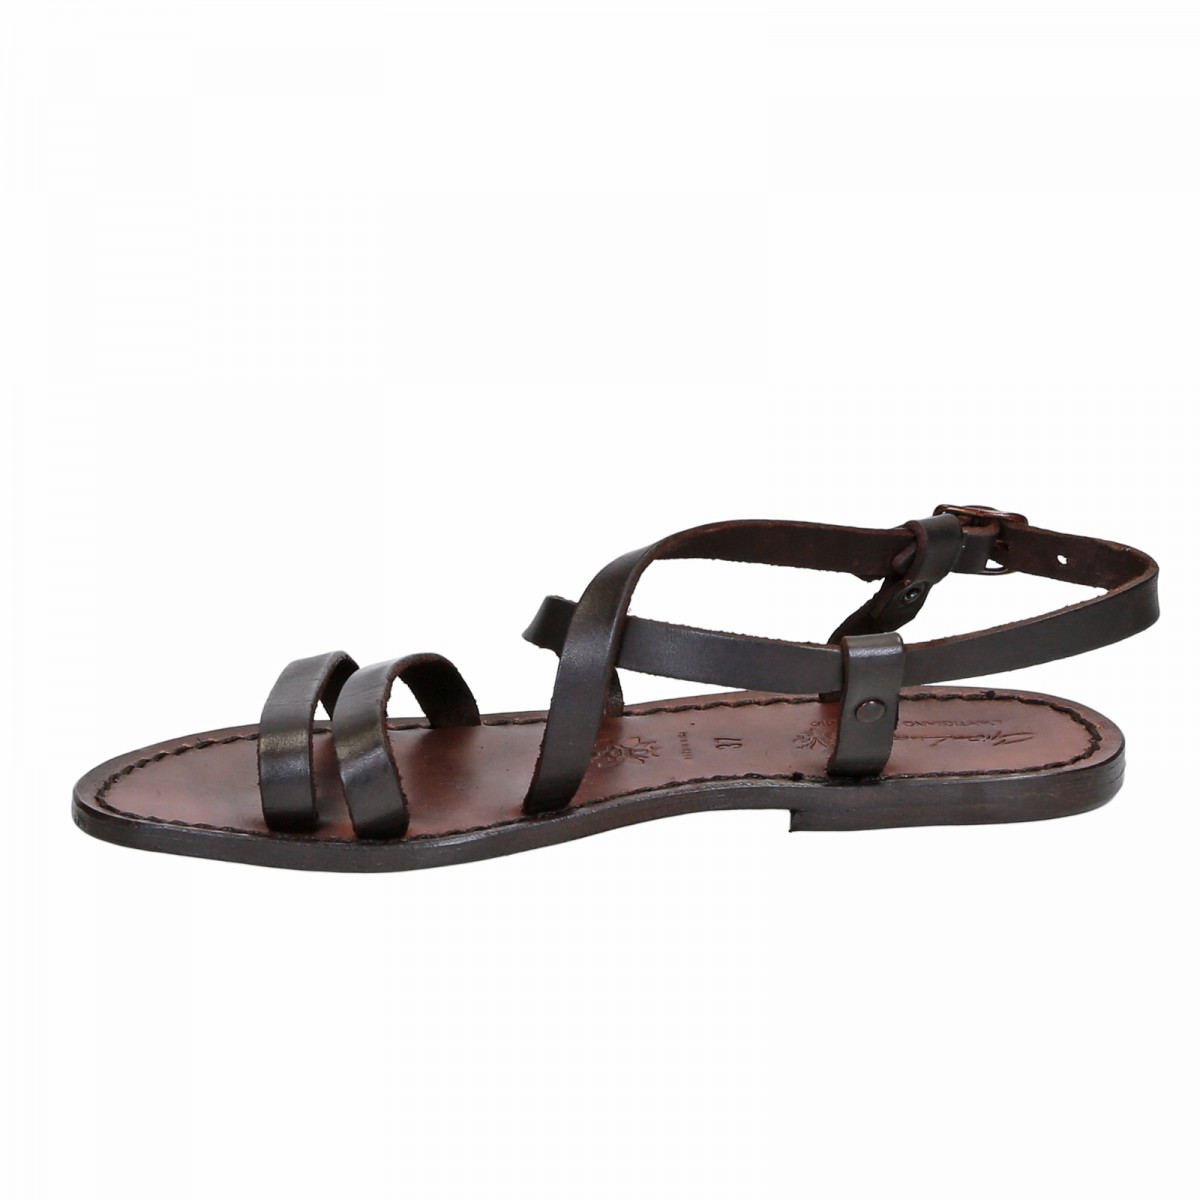 Women's brown leather sandals hand made in Italy | The leather craftsmen